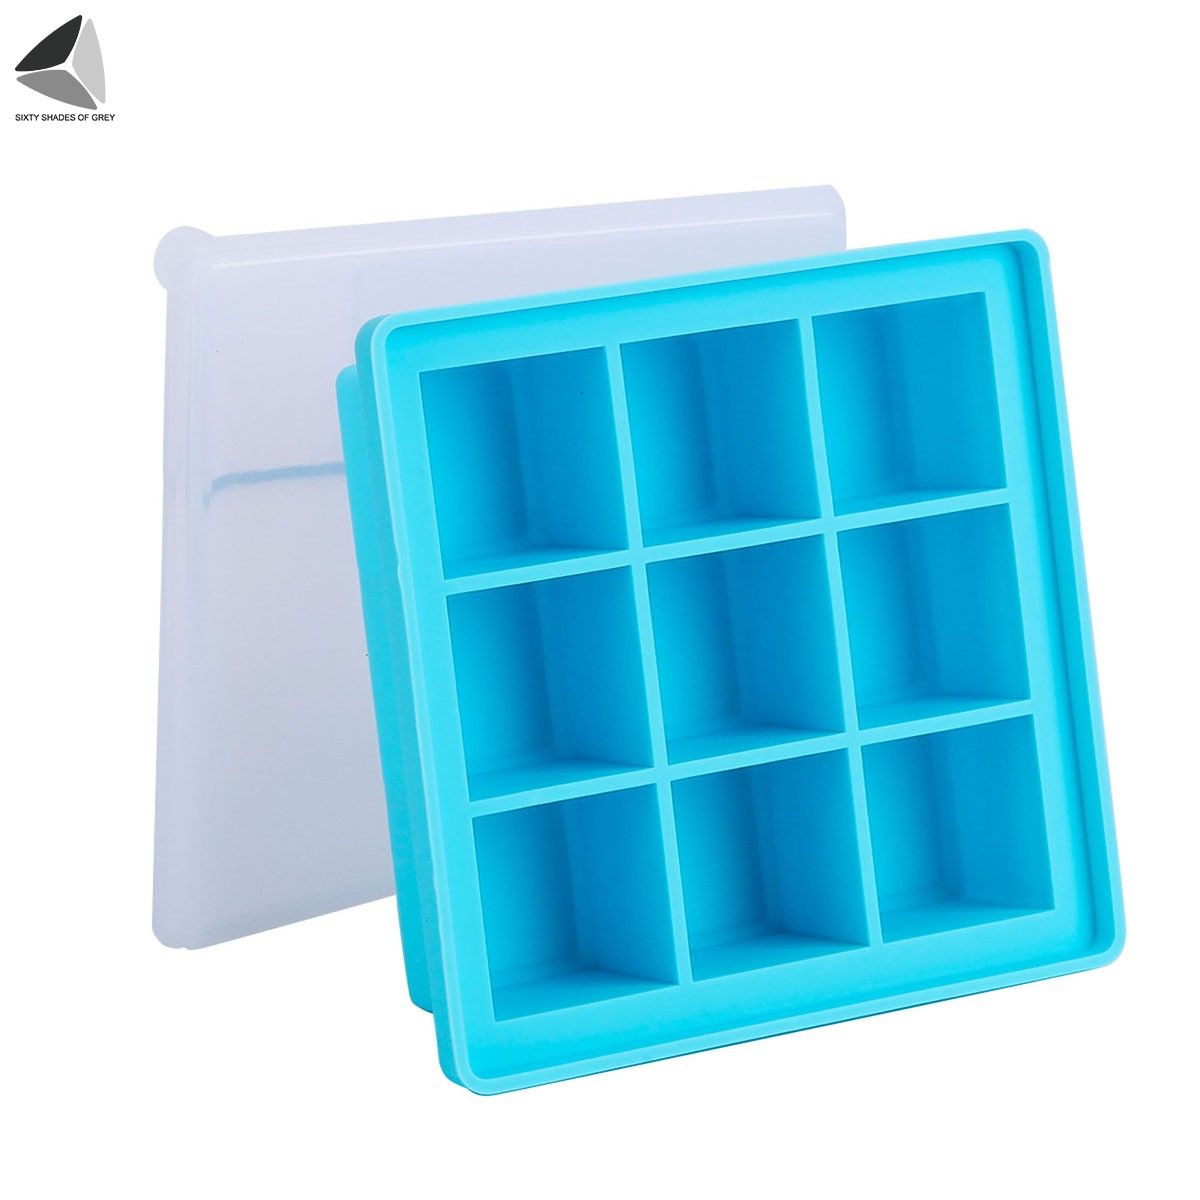 PULLIMORE 2 Pcs Ice Cube Trays 9 / 25 Pcs Square Flexible Easy Release Silicone Ice Maker Mold for Beverages Whiskey Wine Cocktail Coffee Juice (9 + 25 Gird) - image 3 of 9